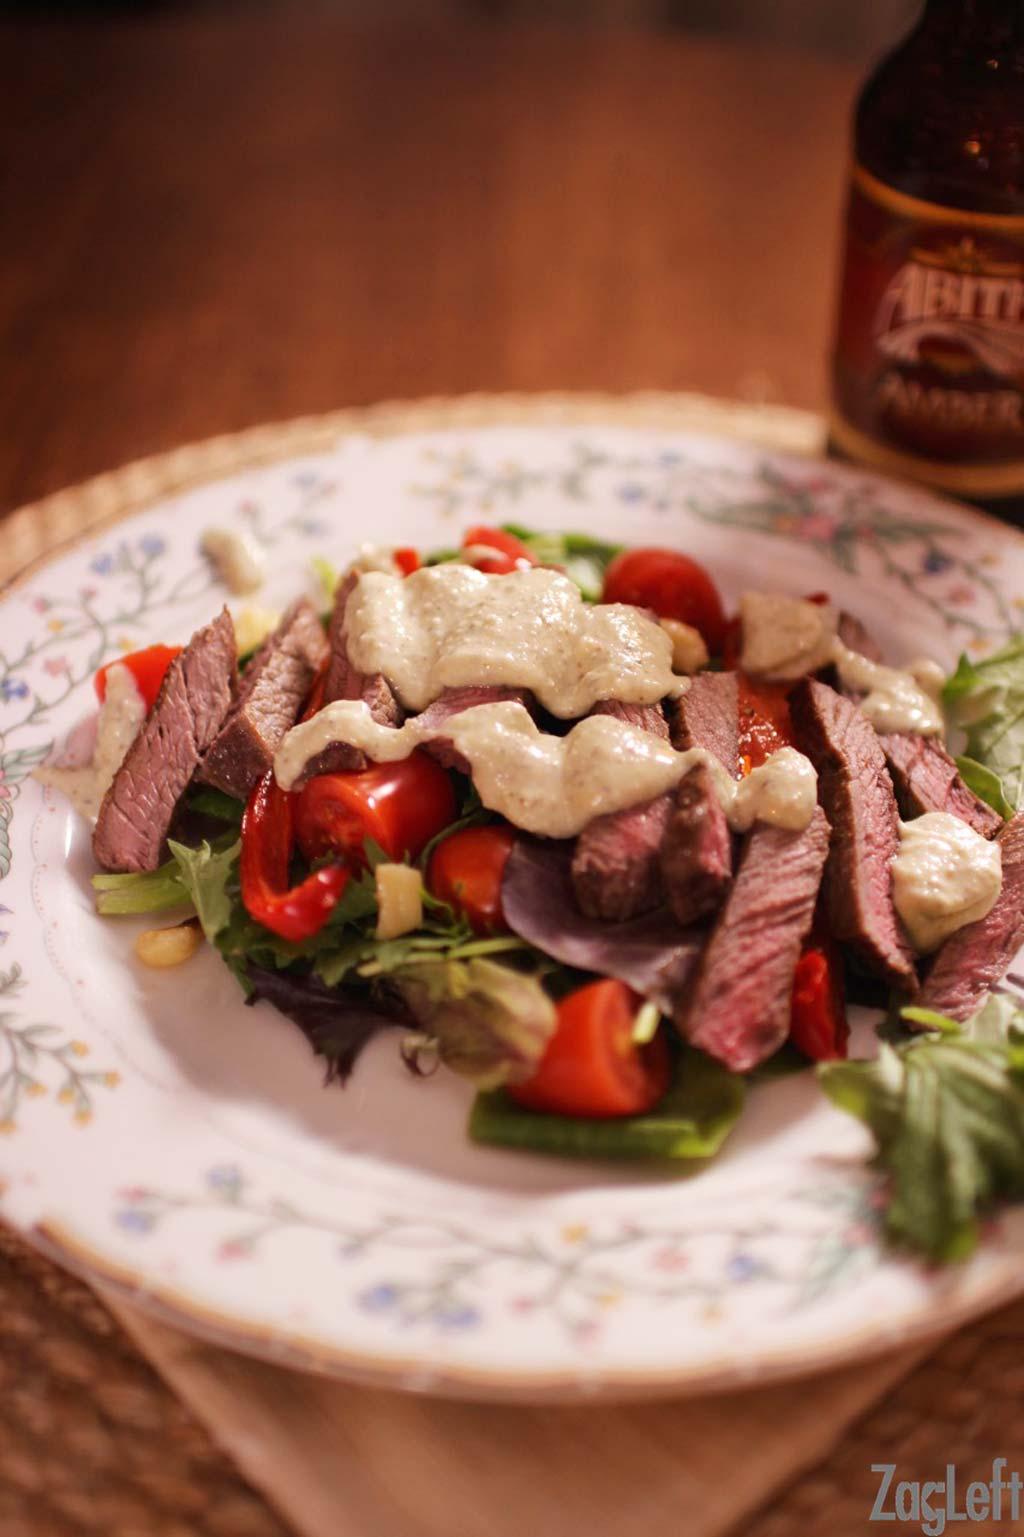 SIZZLING STEAK SALAD 2 garlic cloves 1 medium red pepper, sliced ½ tablespoon olive oil ¼ teaspoon creole seasoning mix (I use Tony Chachere's) 1 Top Sirloin Steak, ¾-inch thick 2 teaspoons neutral